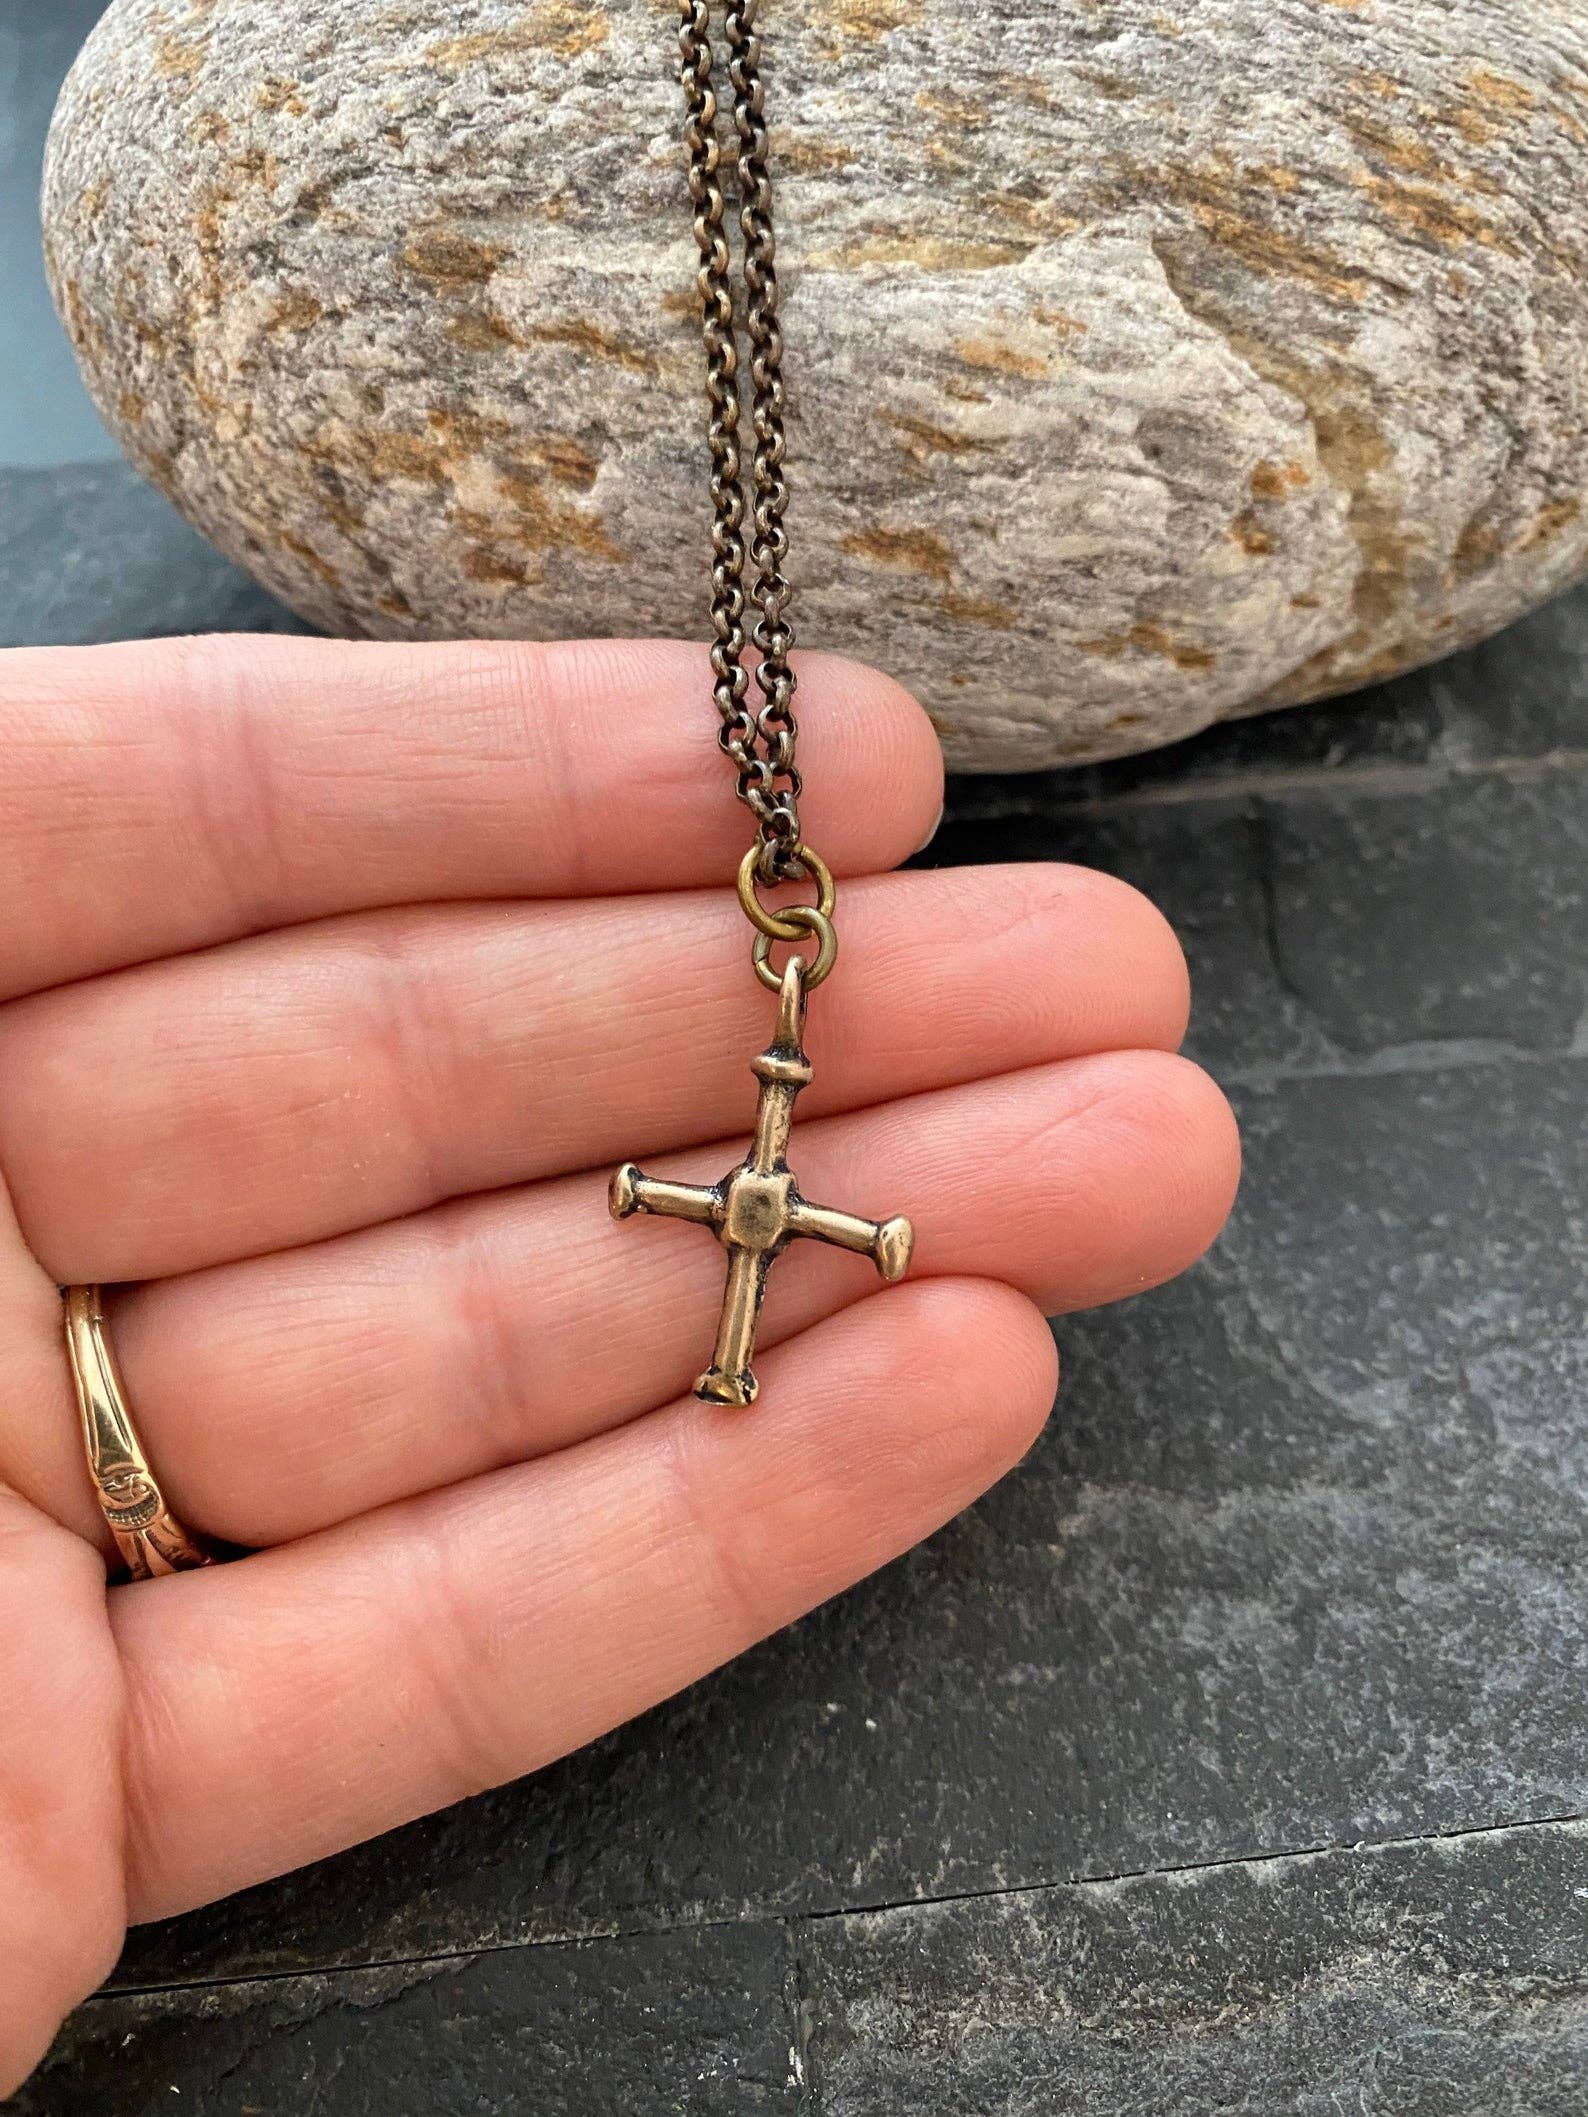 Antique bronze filigree cross necklace with mustard seed, Bronze Filigree cross  necklace for women, Faith of a mustard seed necklace